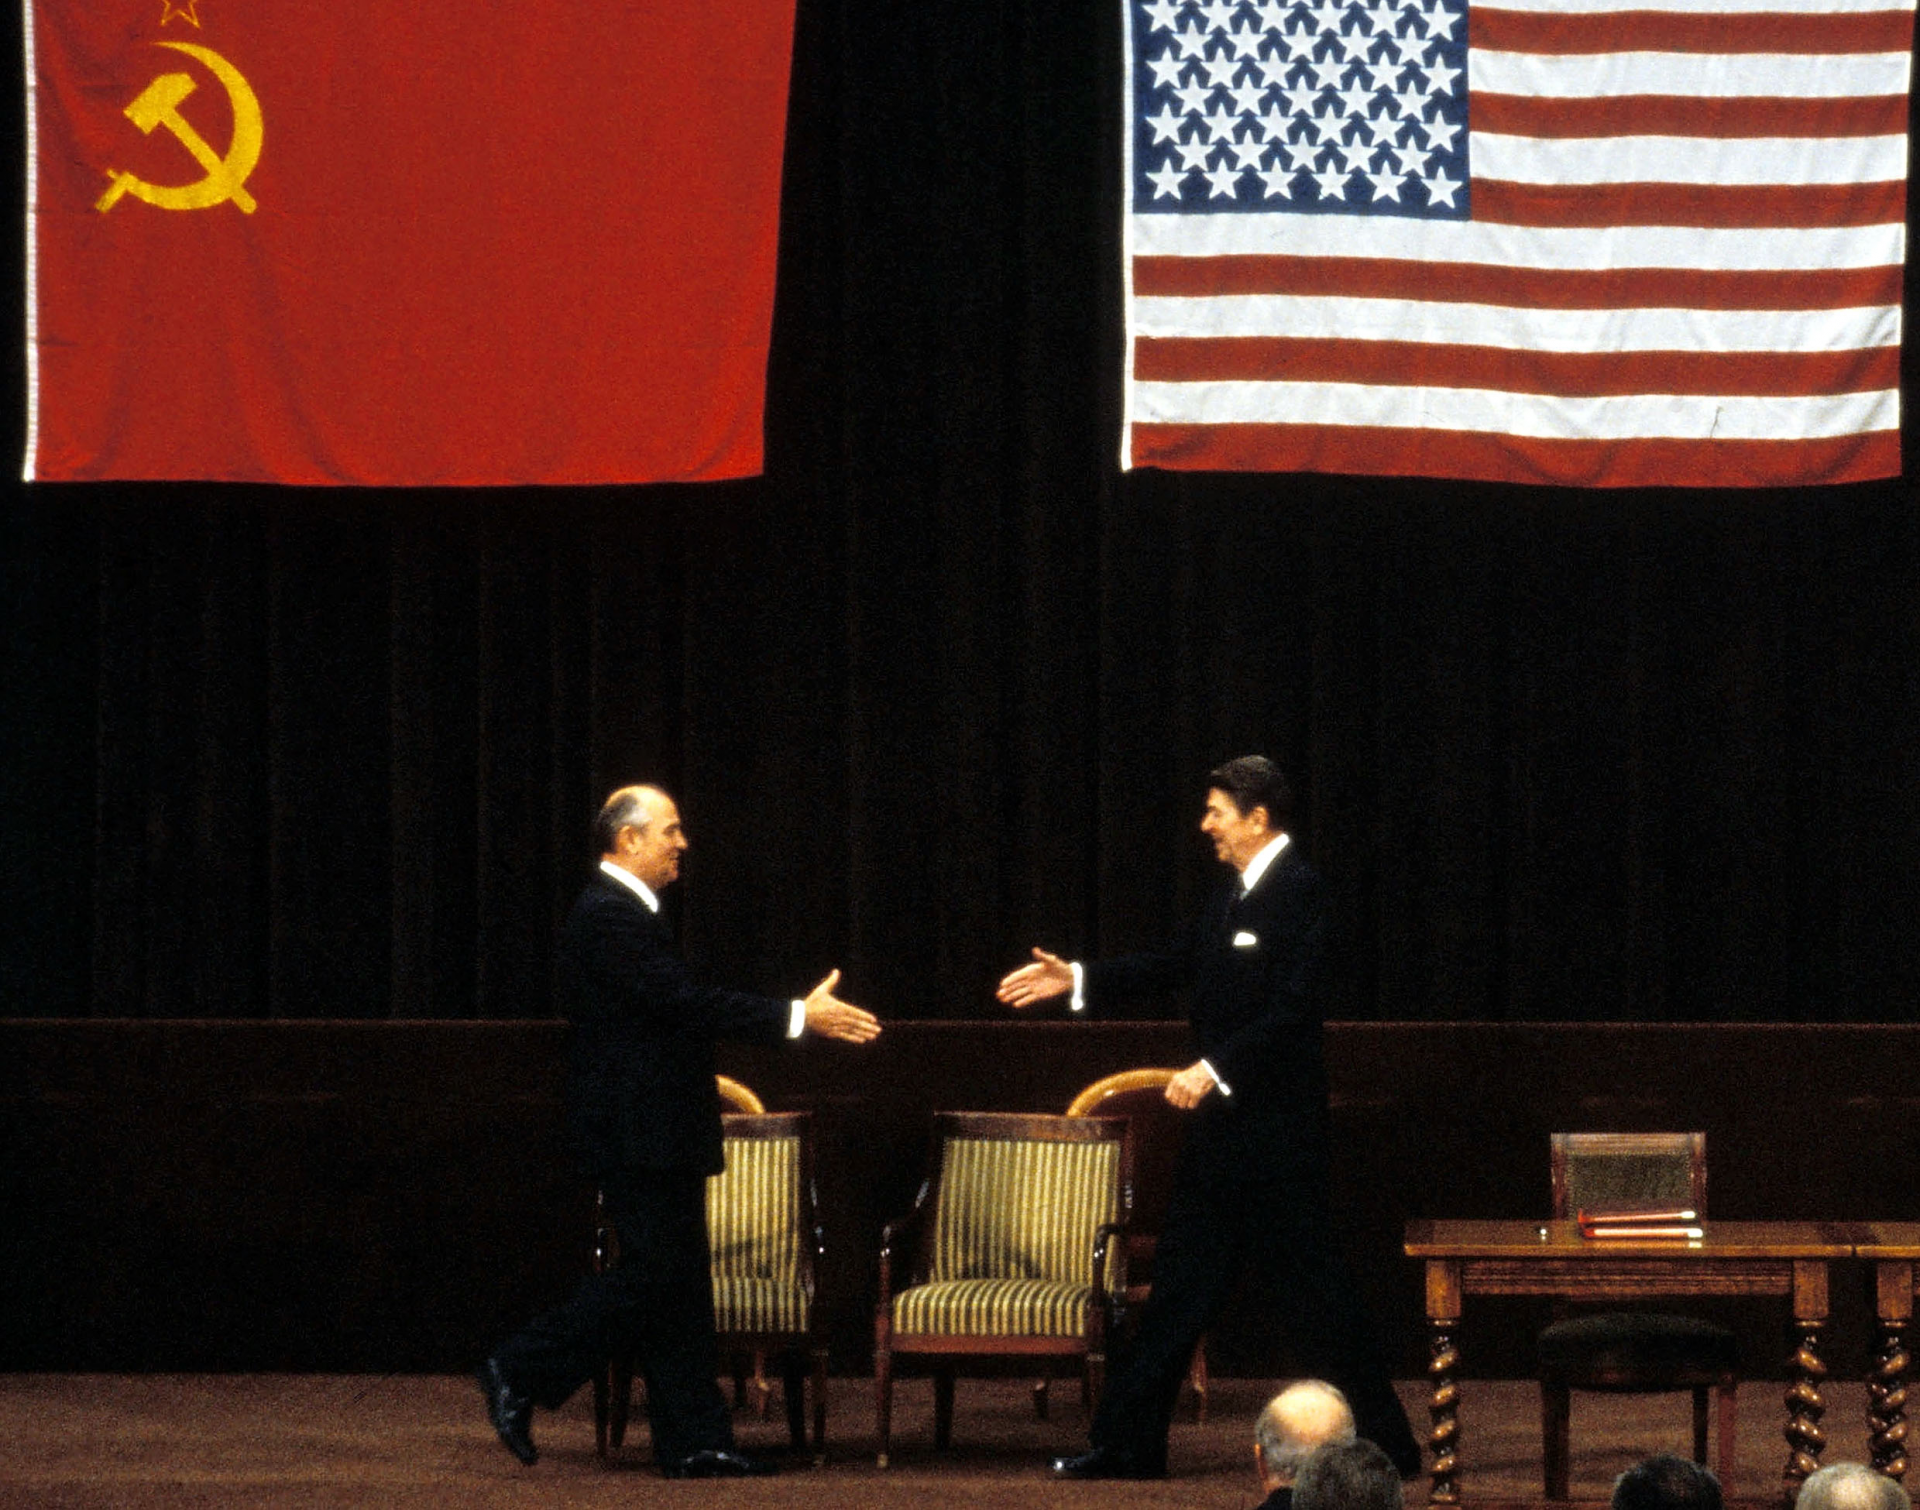 Gorbachev and Reagan - two political giants who ended the Cold War